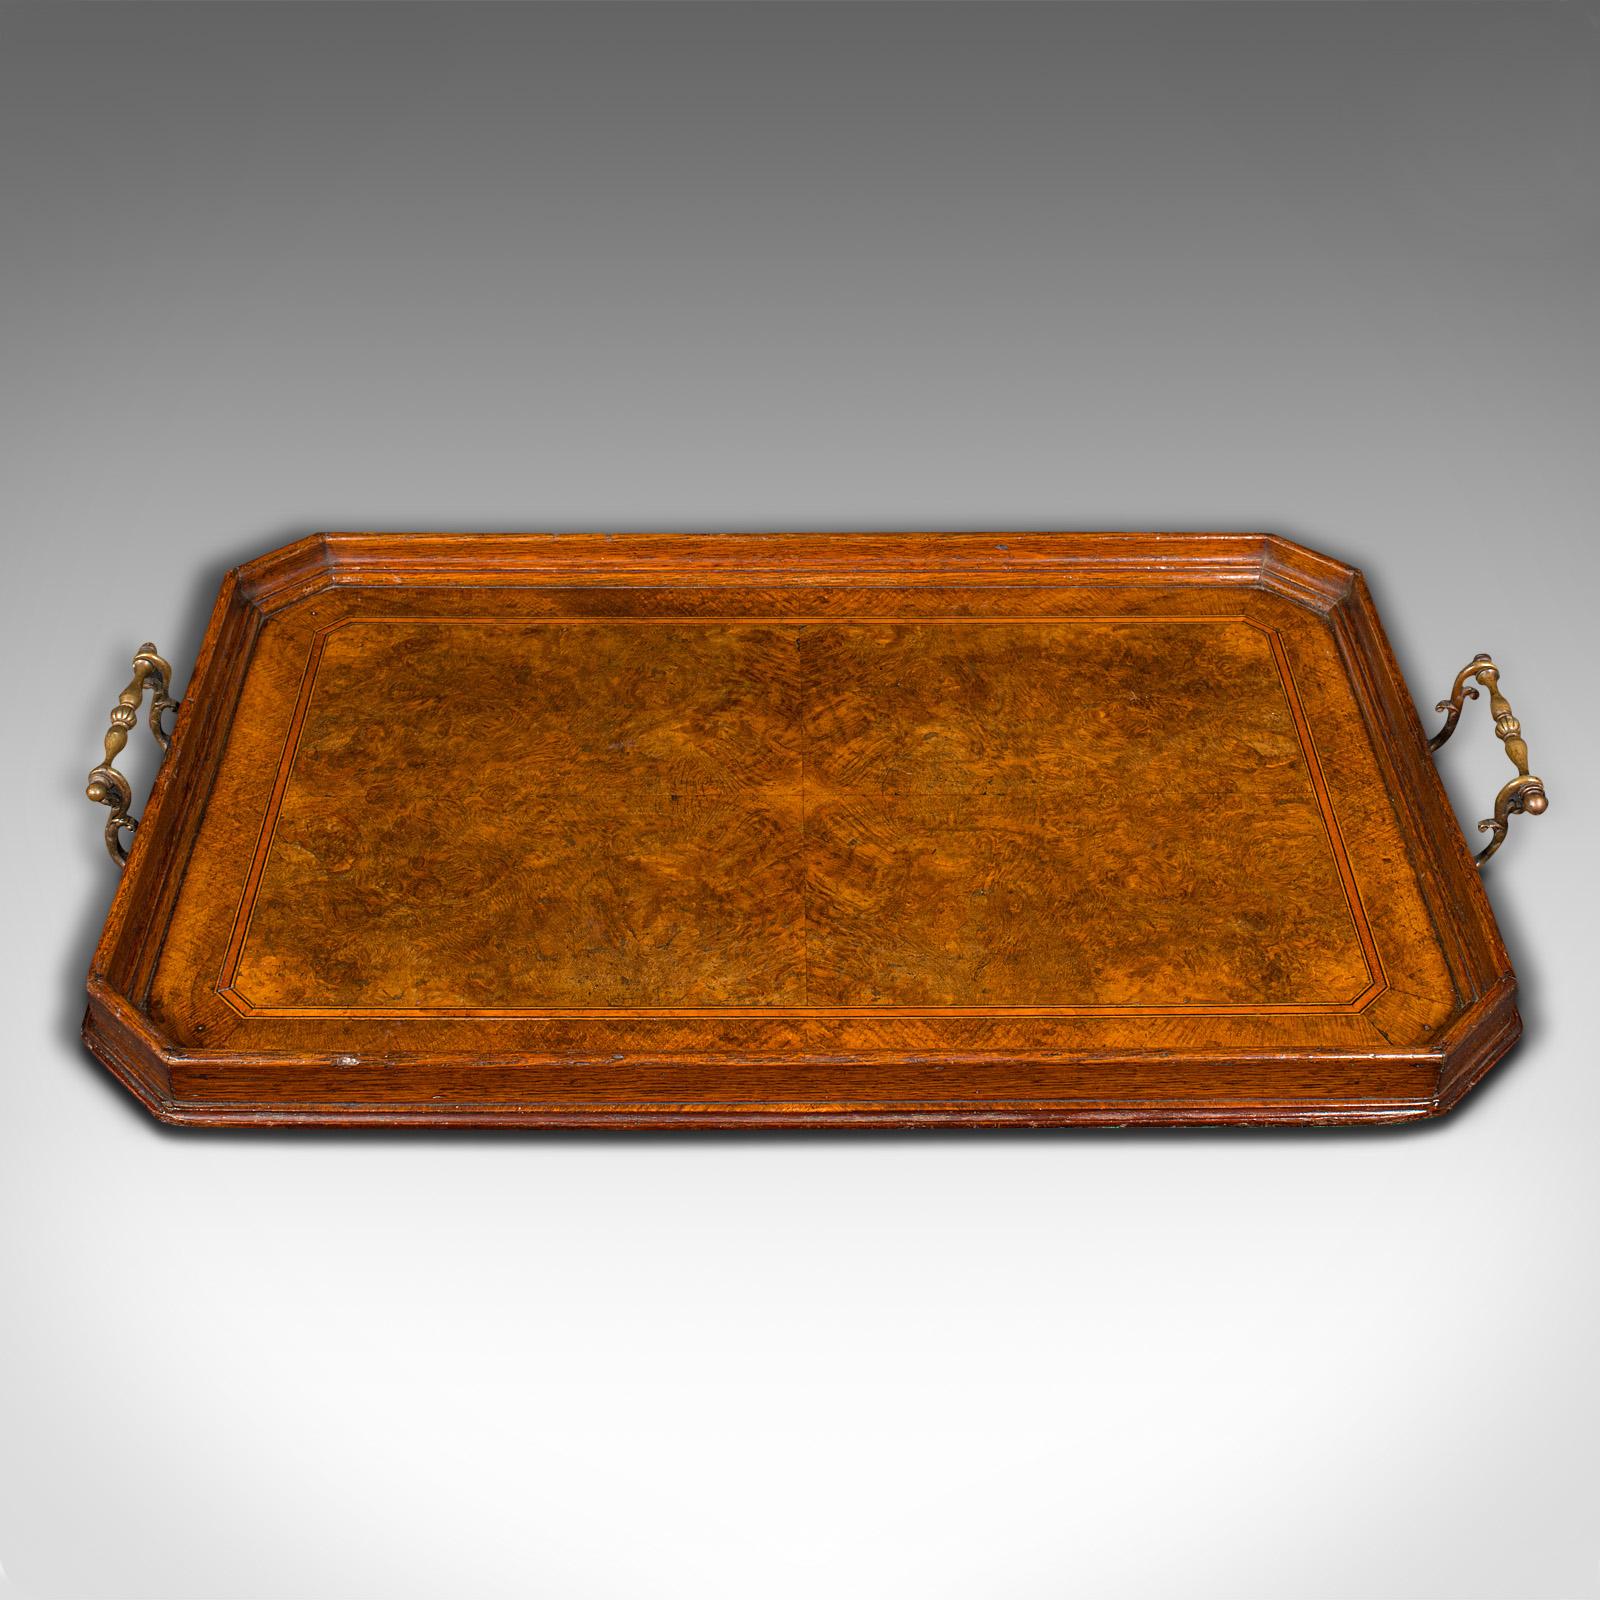 This is an antique butler's serving tray. An English, oak and bookmatched walnut afternoon tea platter, dating to the late Victorian period, circa 1900.

Serve in style with this exquisite Victorian showpiece tray
Displays a desirable aged patina